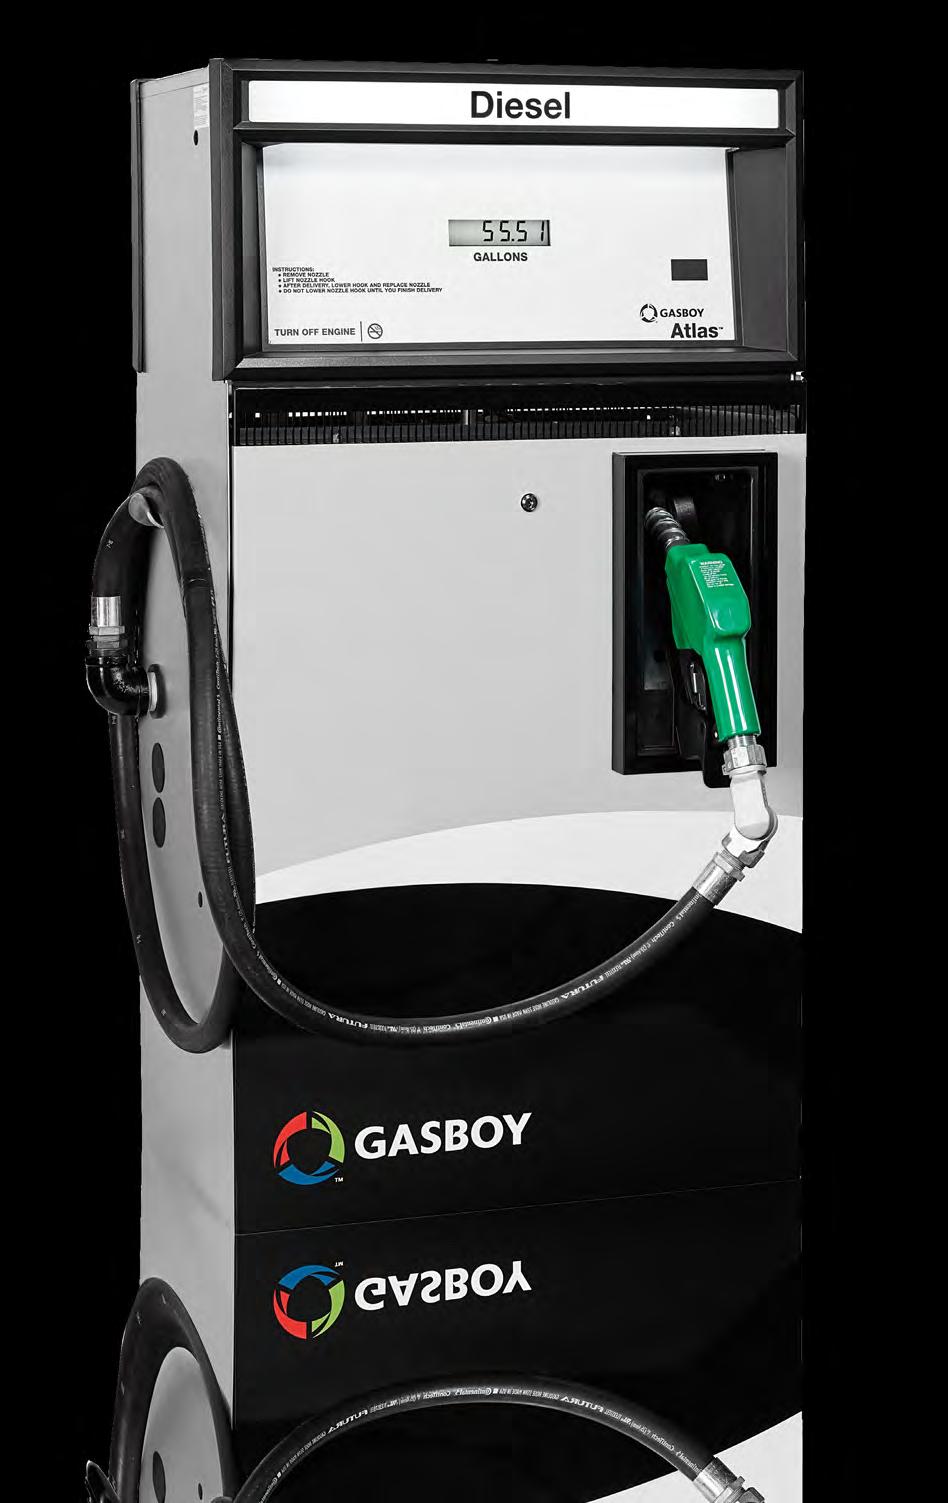 9850K ATLAS 9850K E L E C T R O N I C U L T R A - H I Ultra-Hi Flow The 9850K Series Ultra-Hi Atlas has electronic displays. Available in pump or dispenser style models.